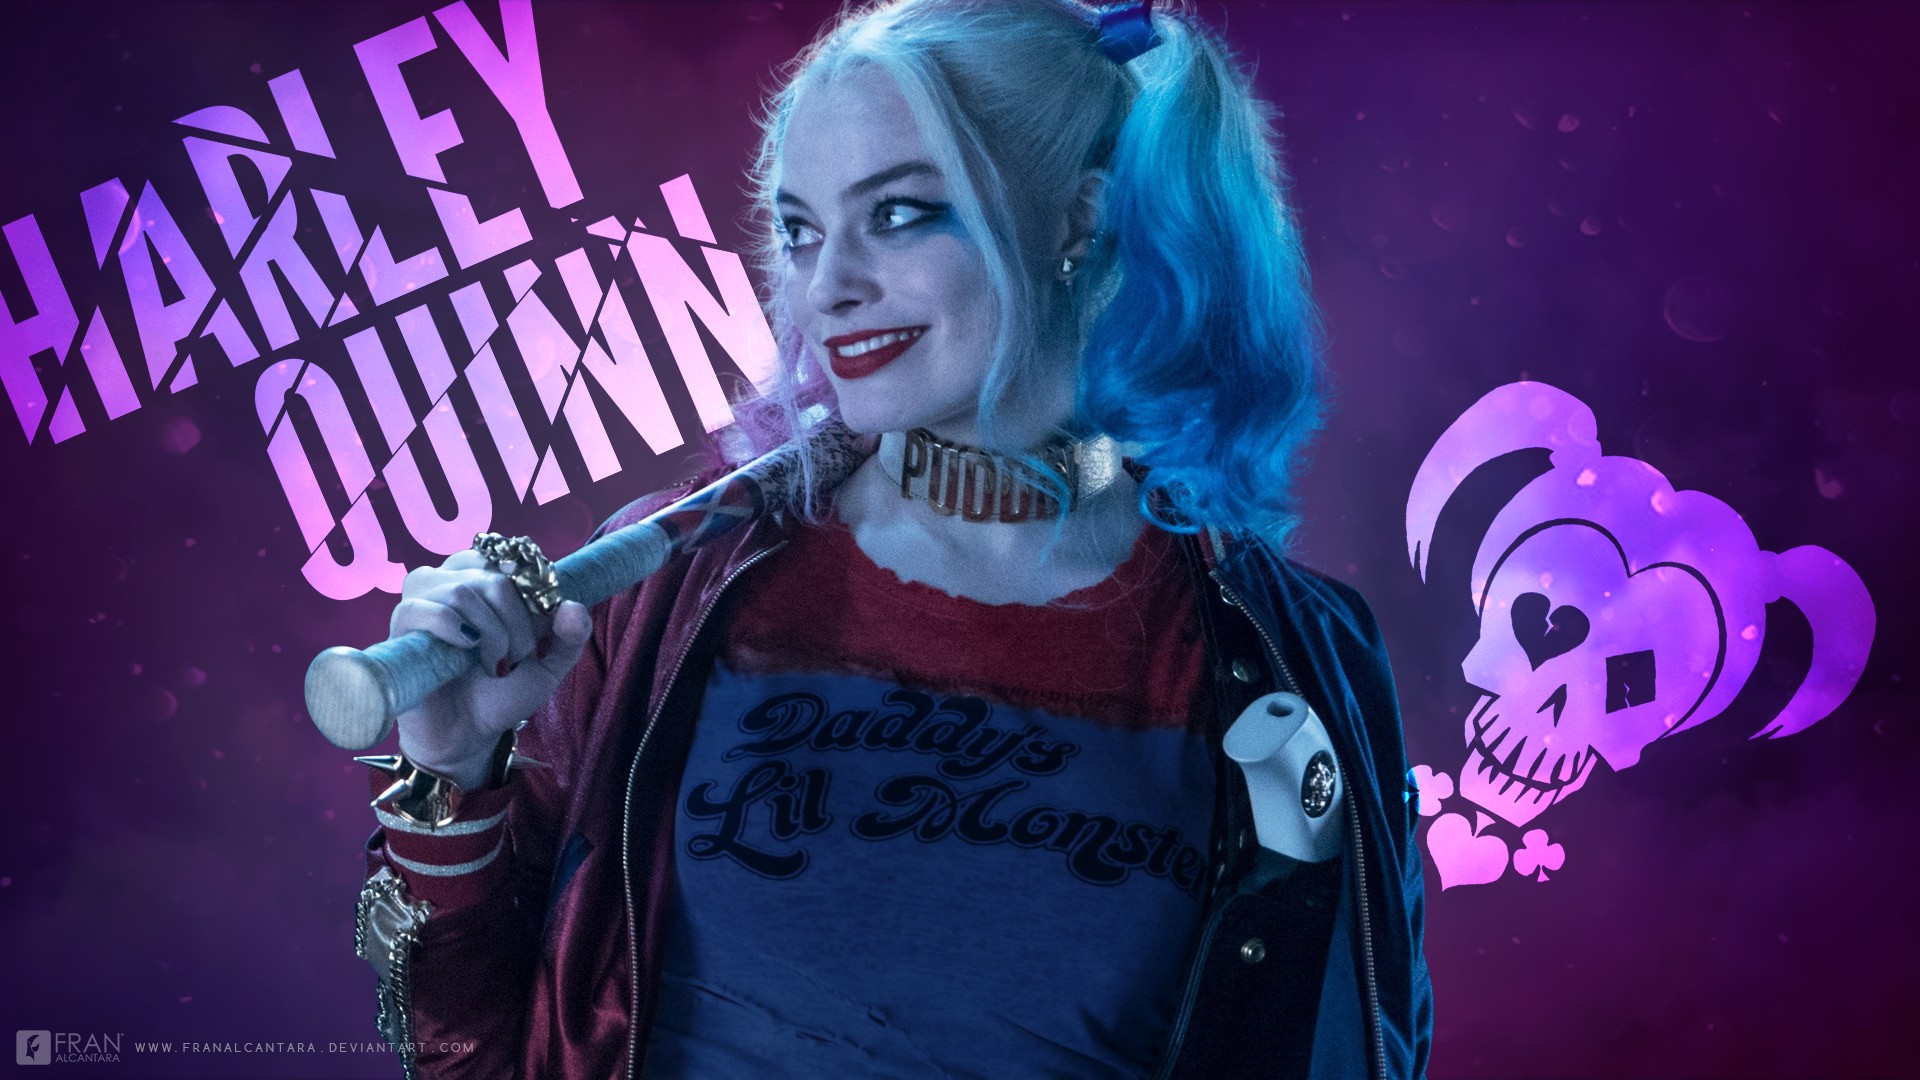 Wallpaper Pictures Of Harley Quinn Desktop with resolution 1920X1080 pixel. You can use this wallpaper as background for your desktop Computer Screensavers, Android or iPhone smartphones